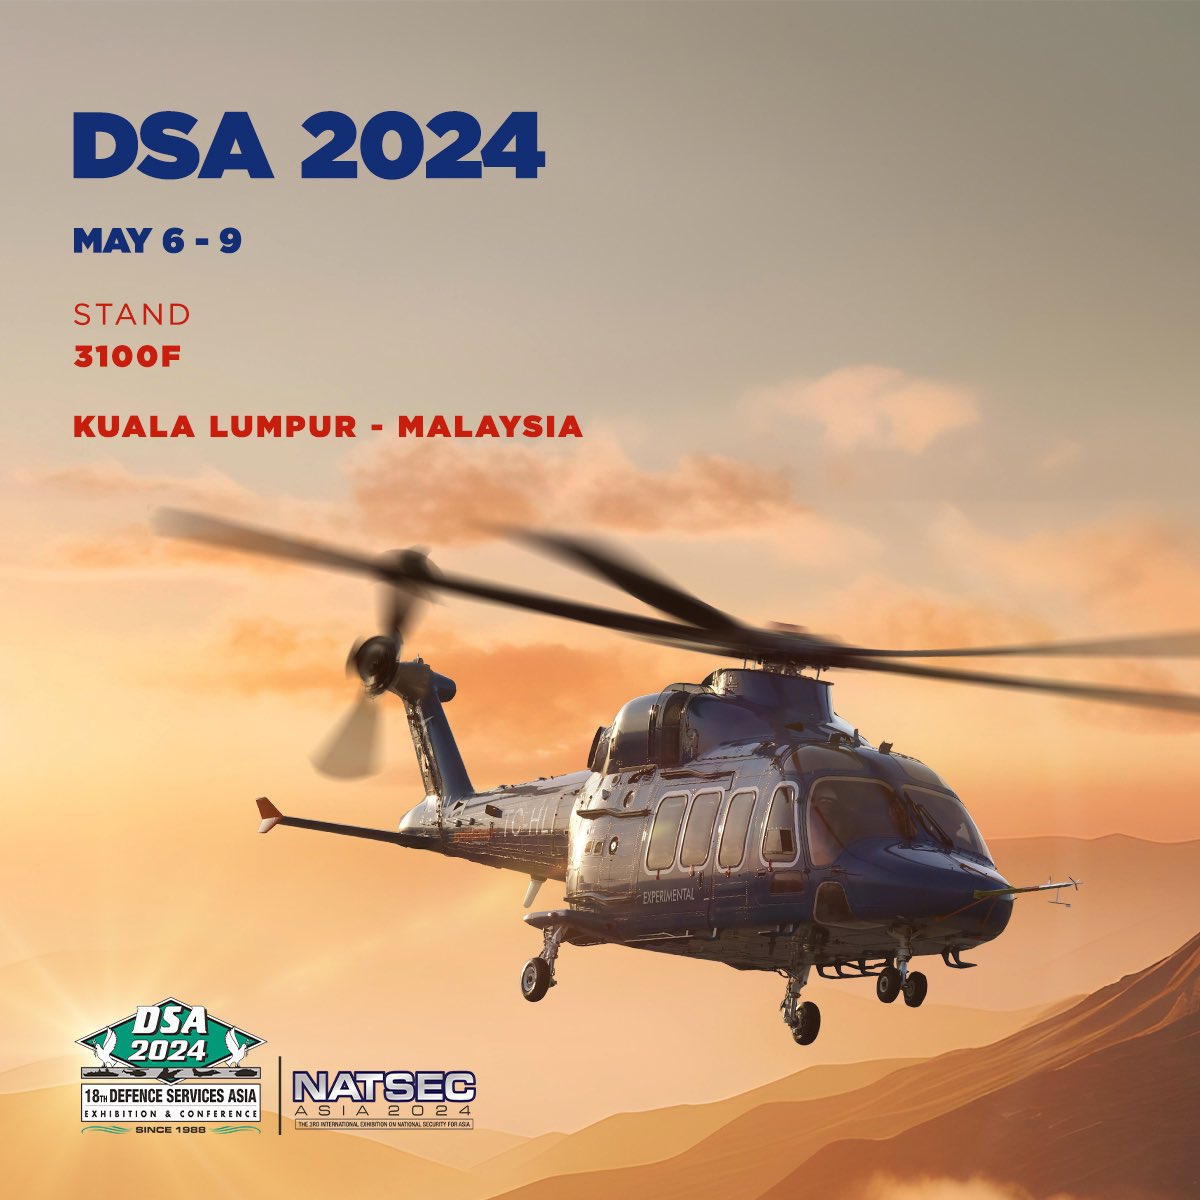 We are ready for #DSA2024 18th Defence Services Asia Exhibition & Conference, Asia's largest defence and homeland security fair at Kuala Lumpur, Malaysia. Come visit our stand 3100F, to explore the future in the sky! @DSAMalaysia 🗓️ May 6-9 📍Kuala Lumpur, Malaysia